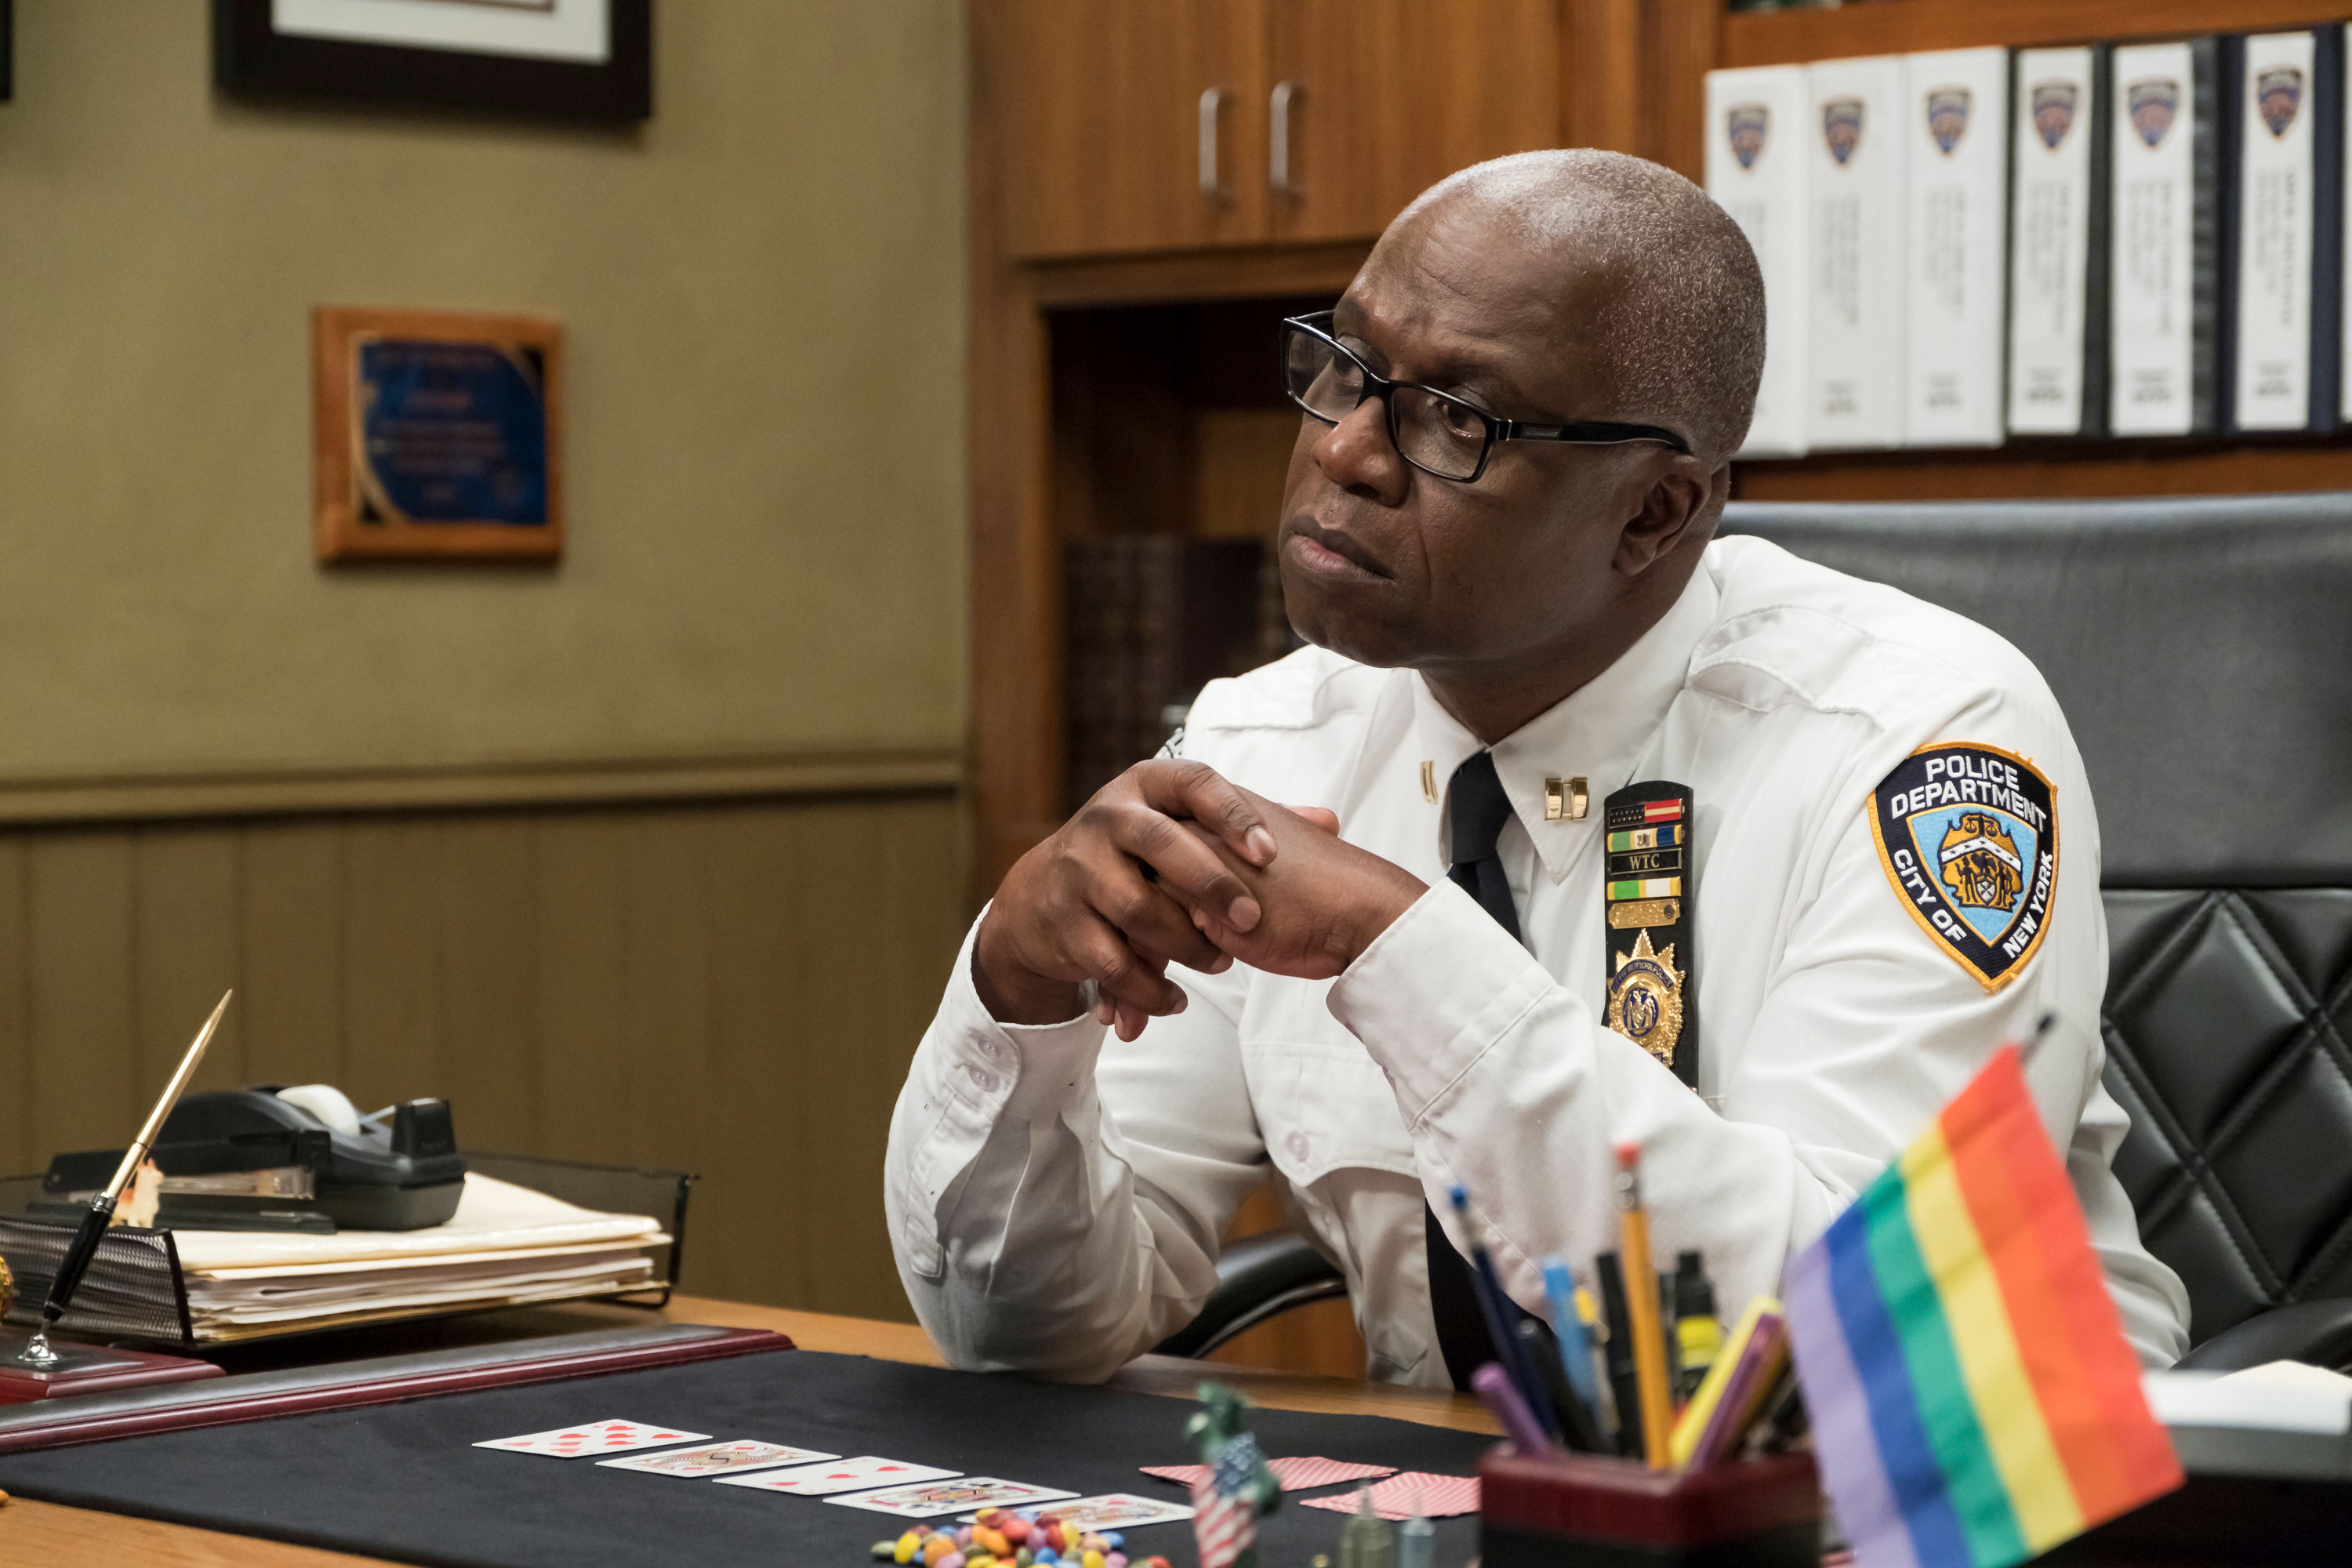 Andre Braugher playing solitaire at his desk